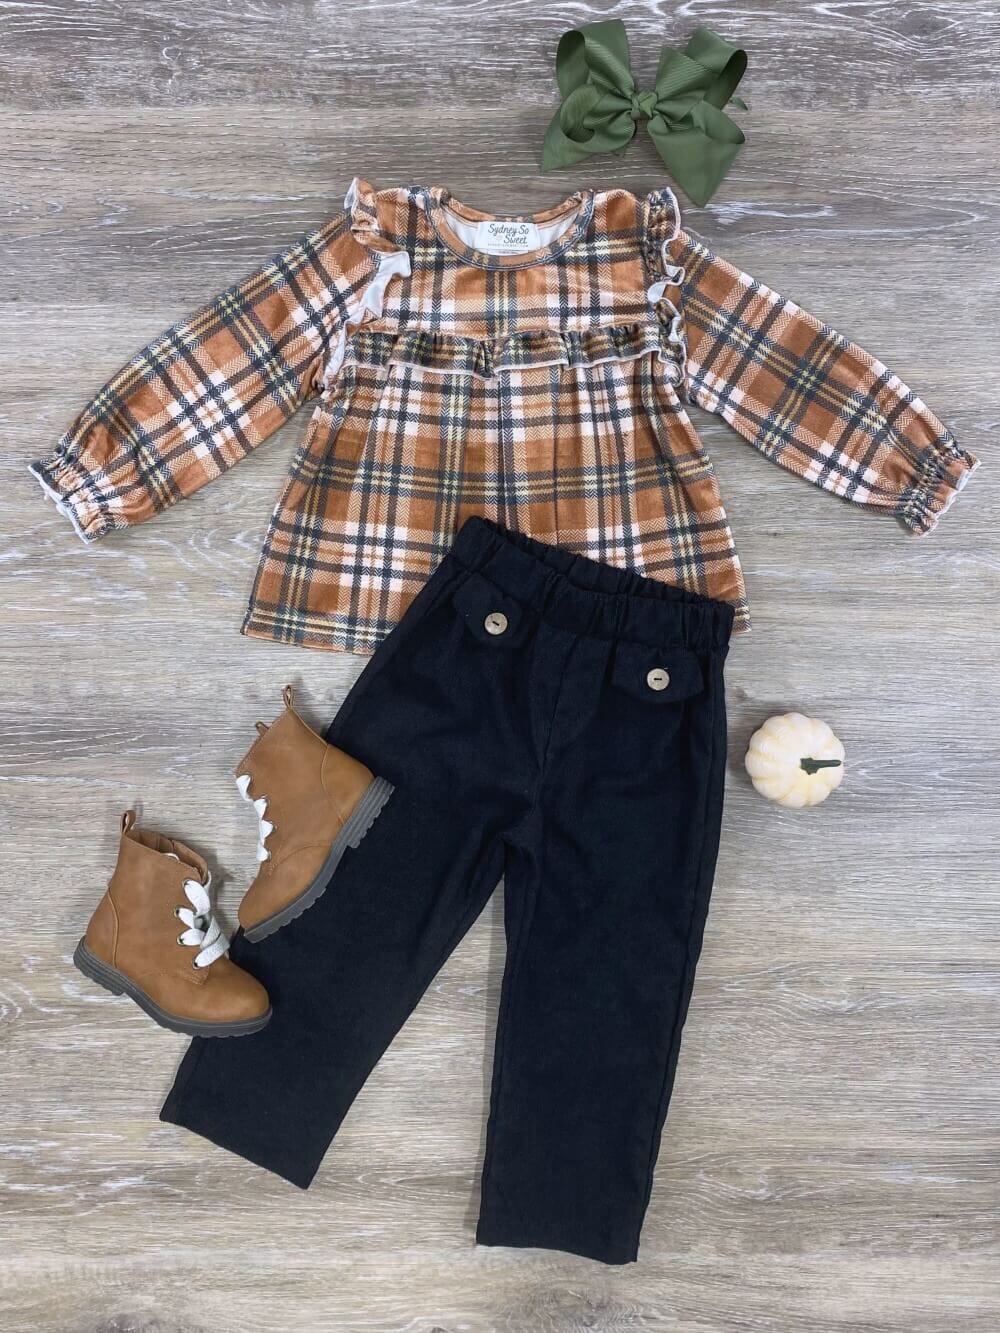 Perfect Fall Velvet Plaid & Corduroy Girls Tunic Top Outfit